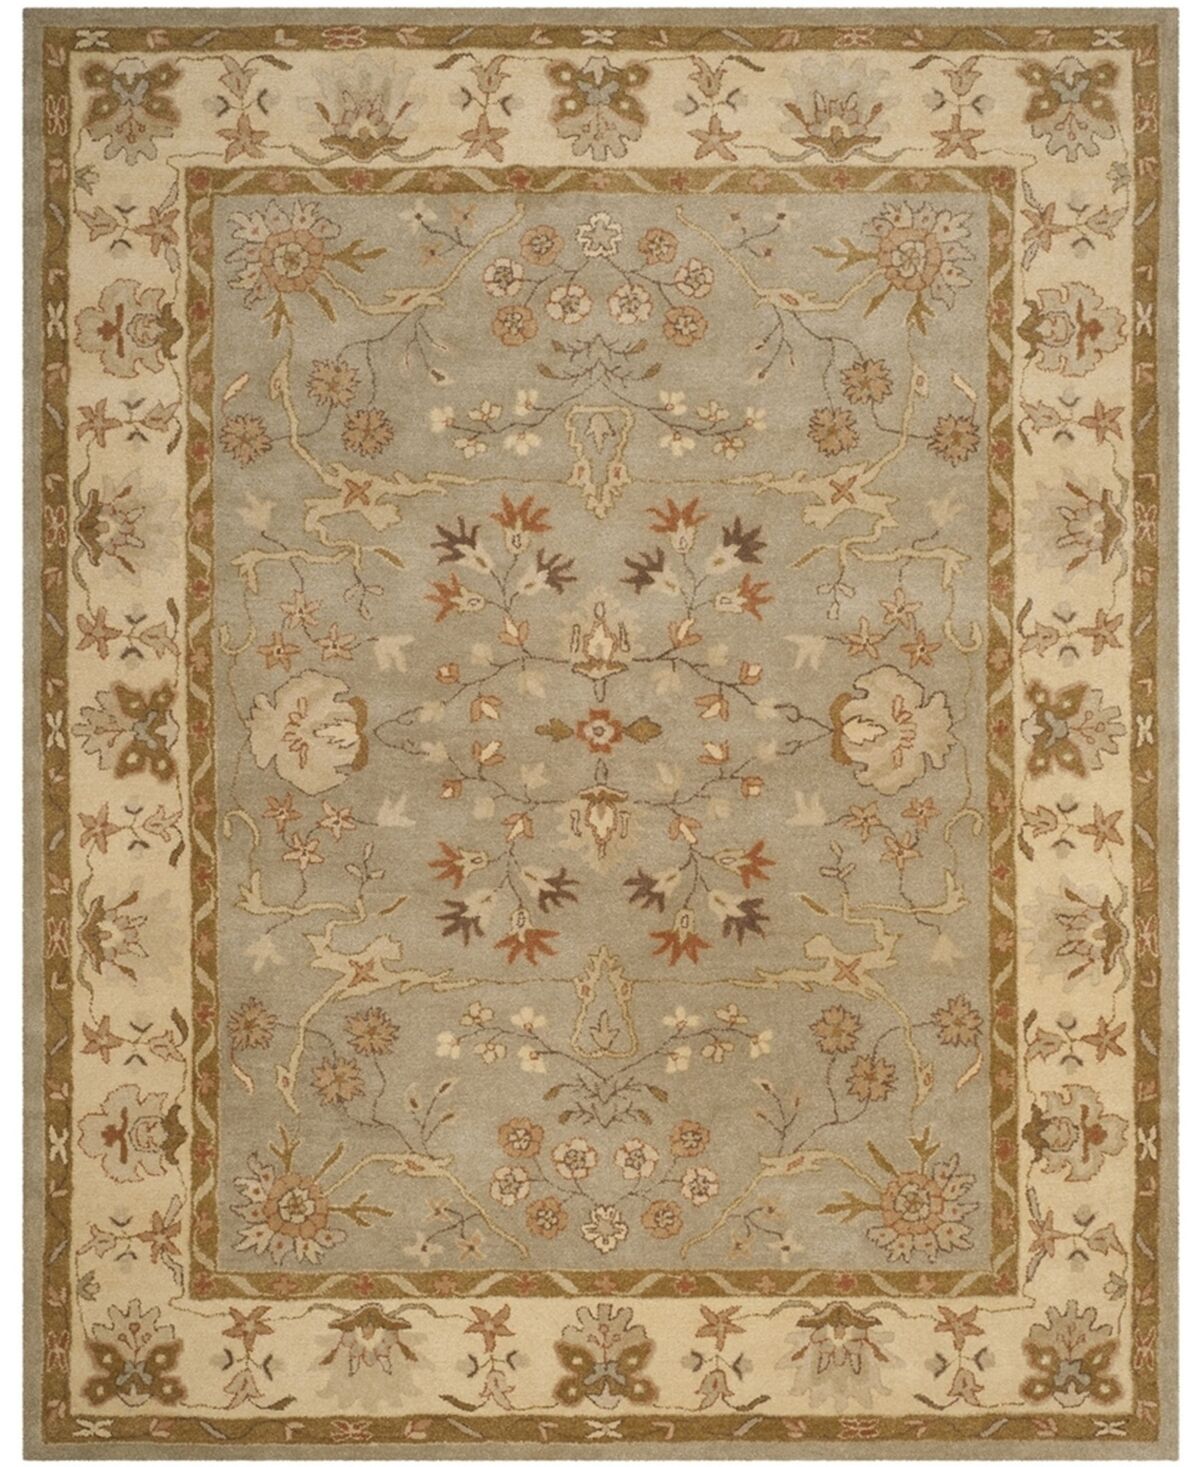 Safavieh Antiquity At62 Silver 6' x 9' Area Rug - Silver